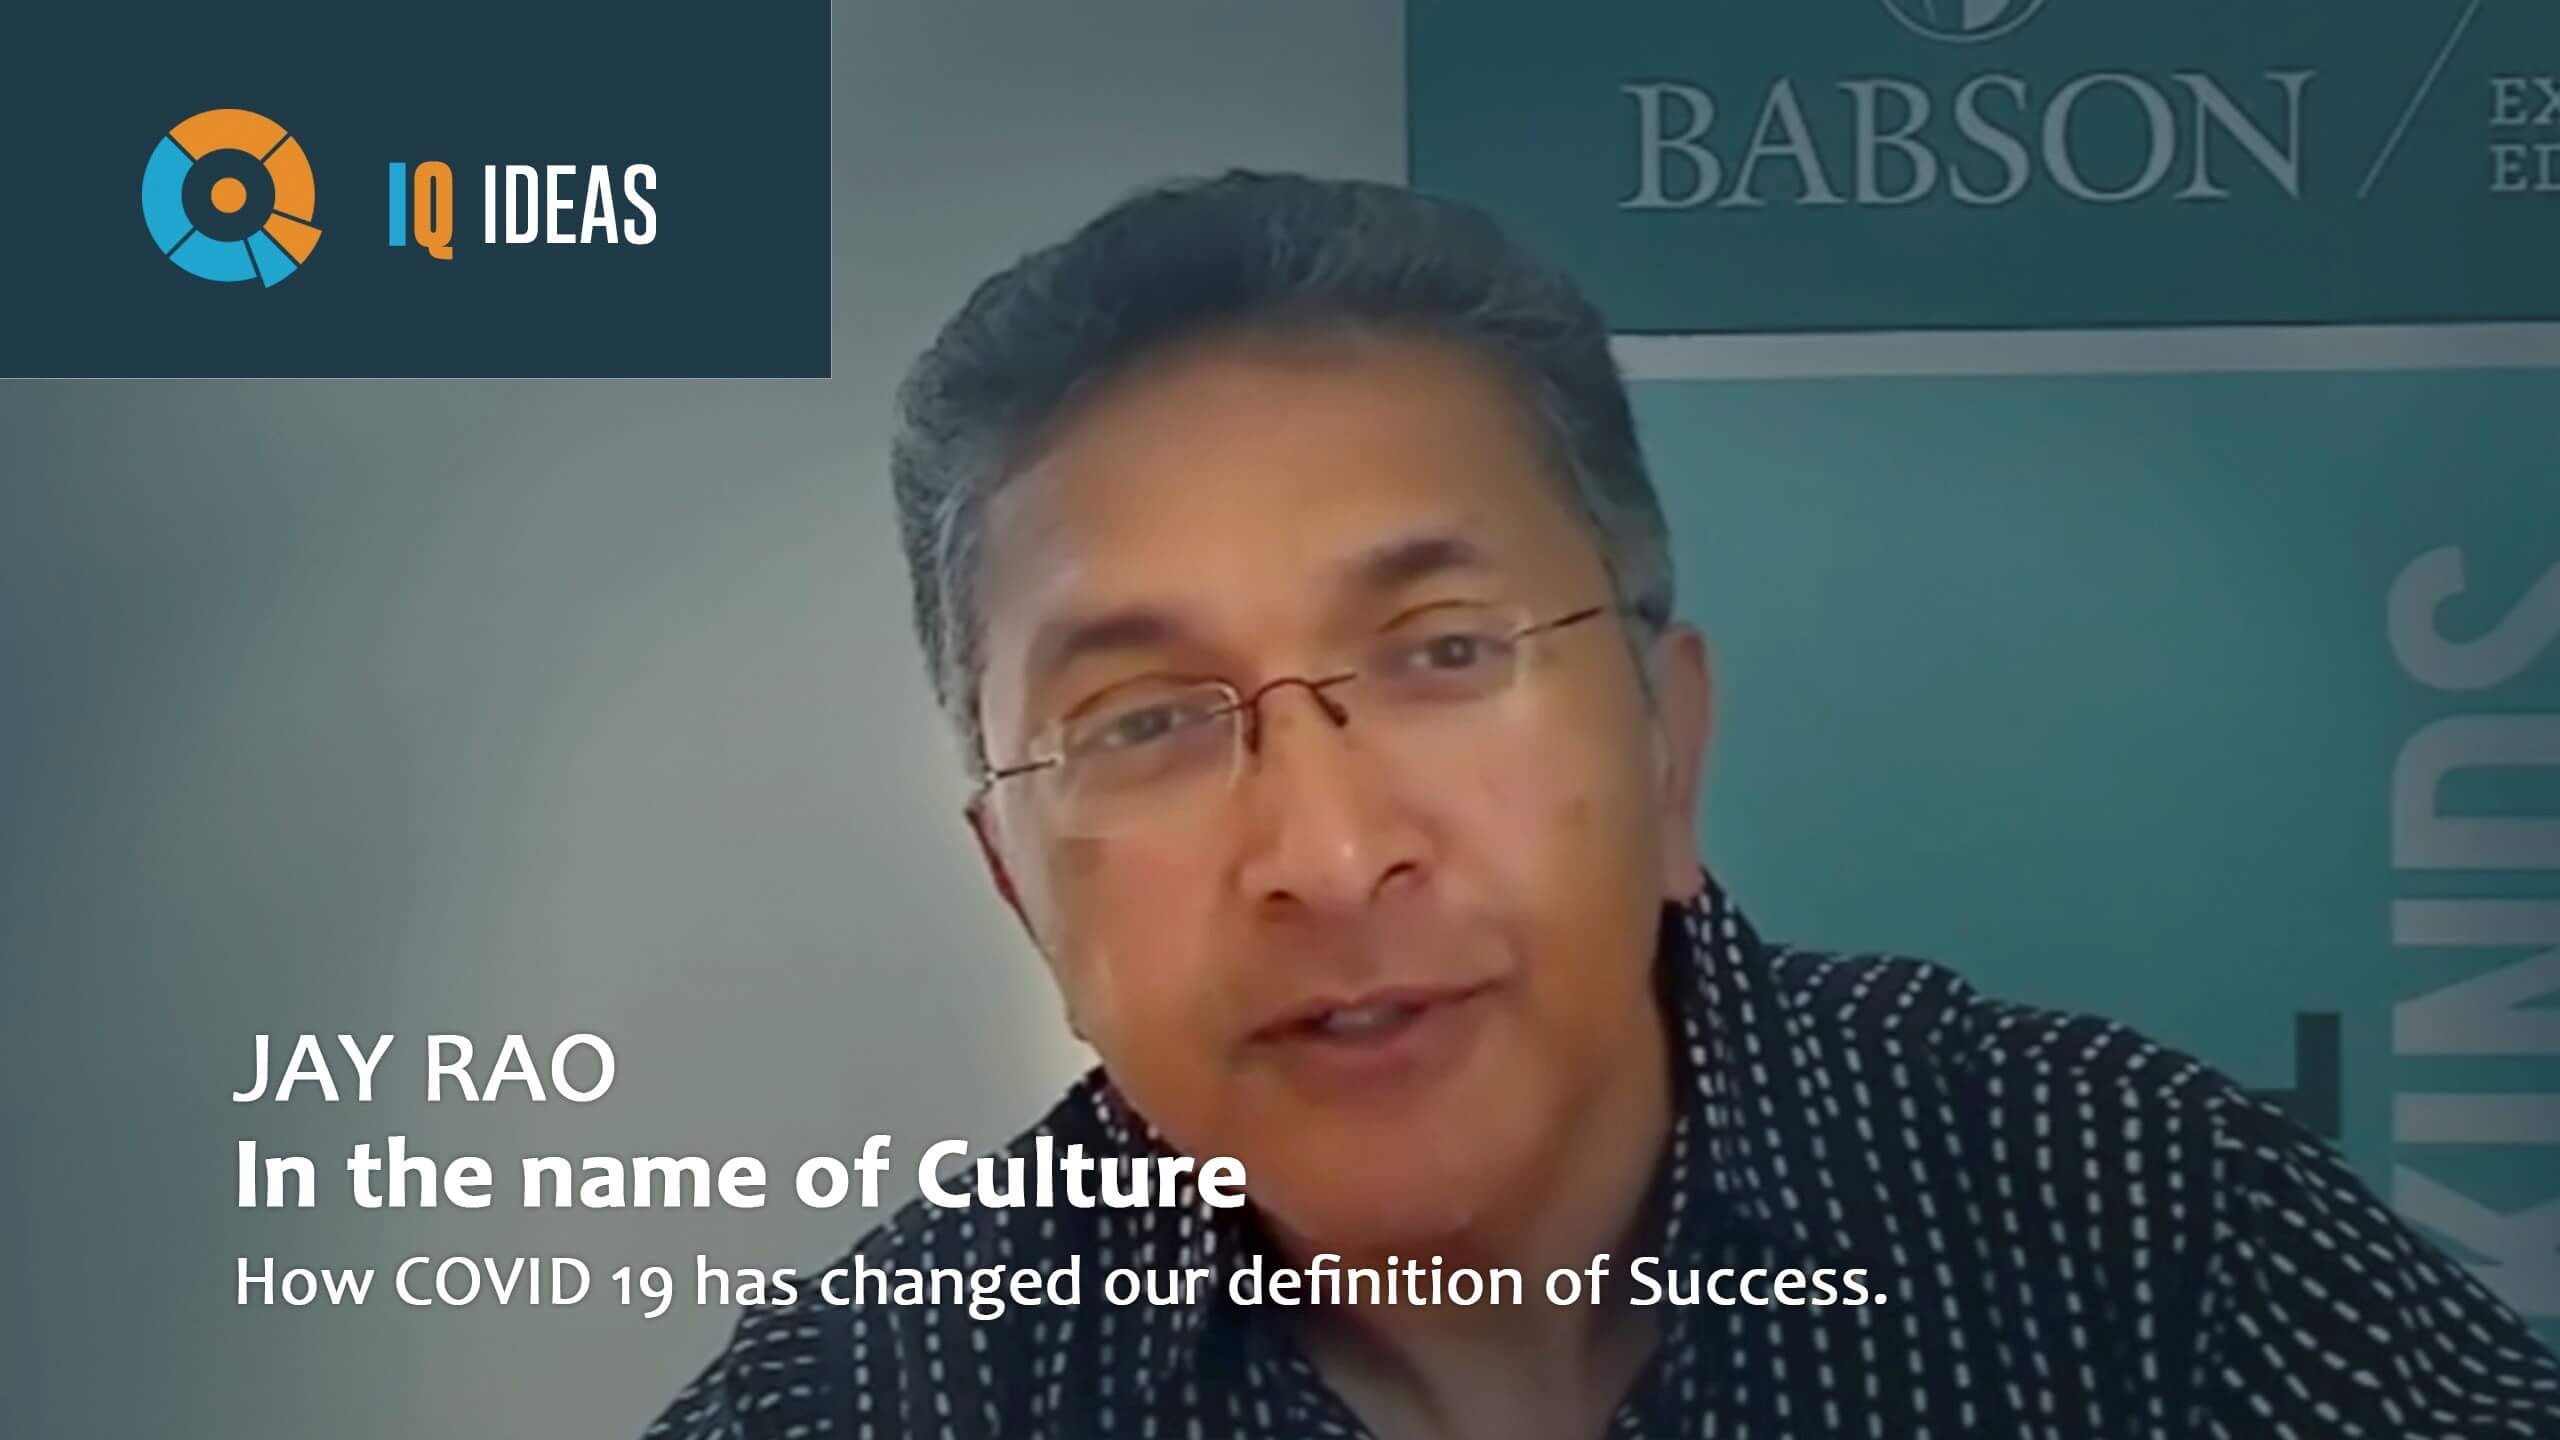 In the name of Culture. How COVID 19 has changed our definition of Success